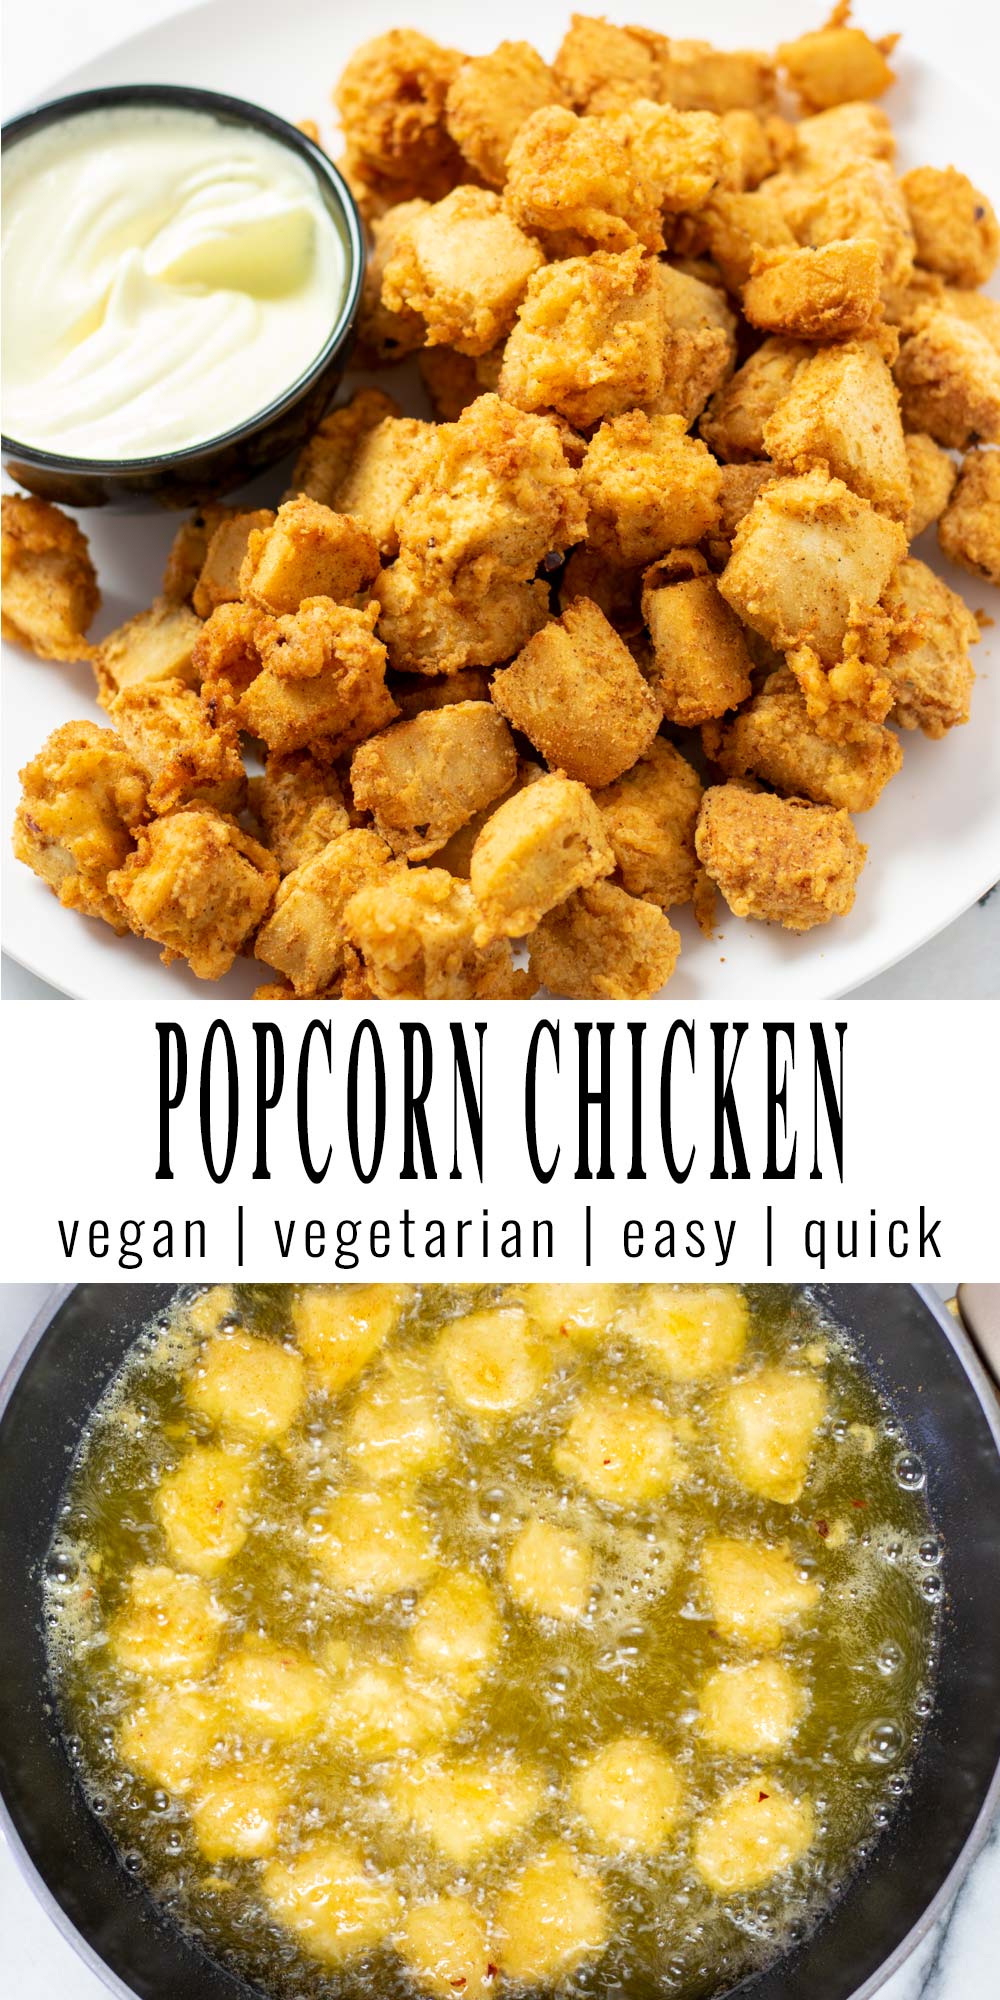 Collage of two pictures of the Popcorn Chicken with recipe title text.